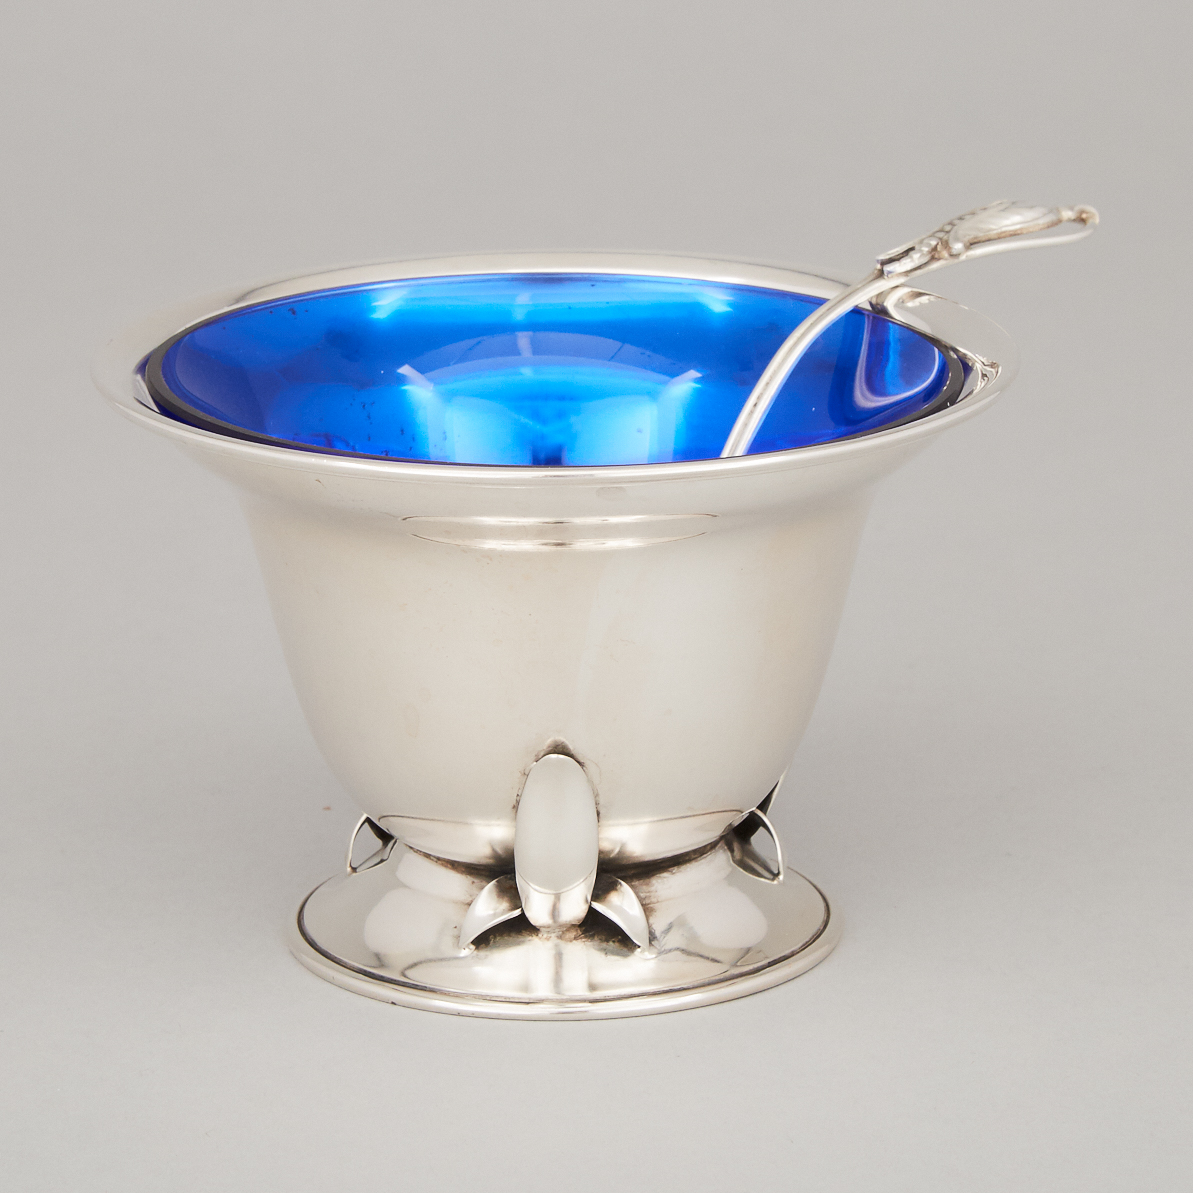 Canadian Silver Steep Sided Bowl with Blossom Pattern Ladle, Carl Poul Petersen, Montreal, Que., mid-20th century